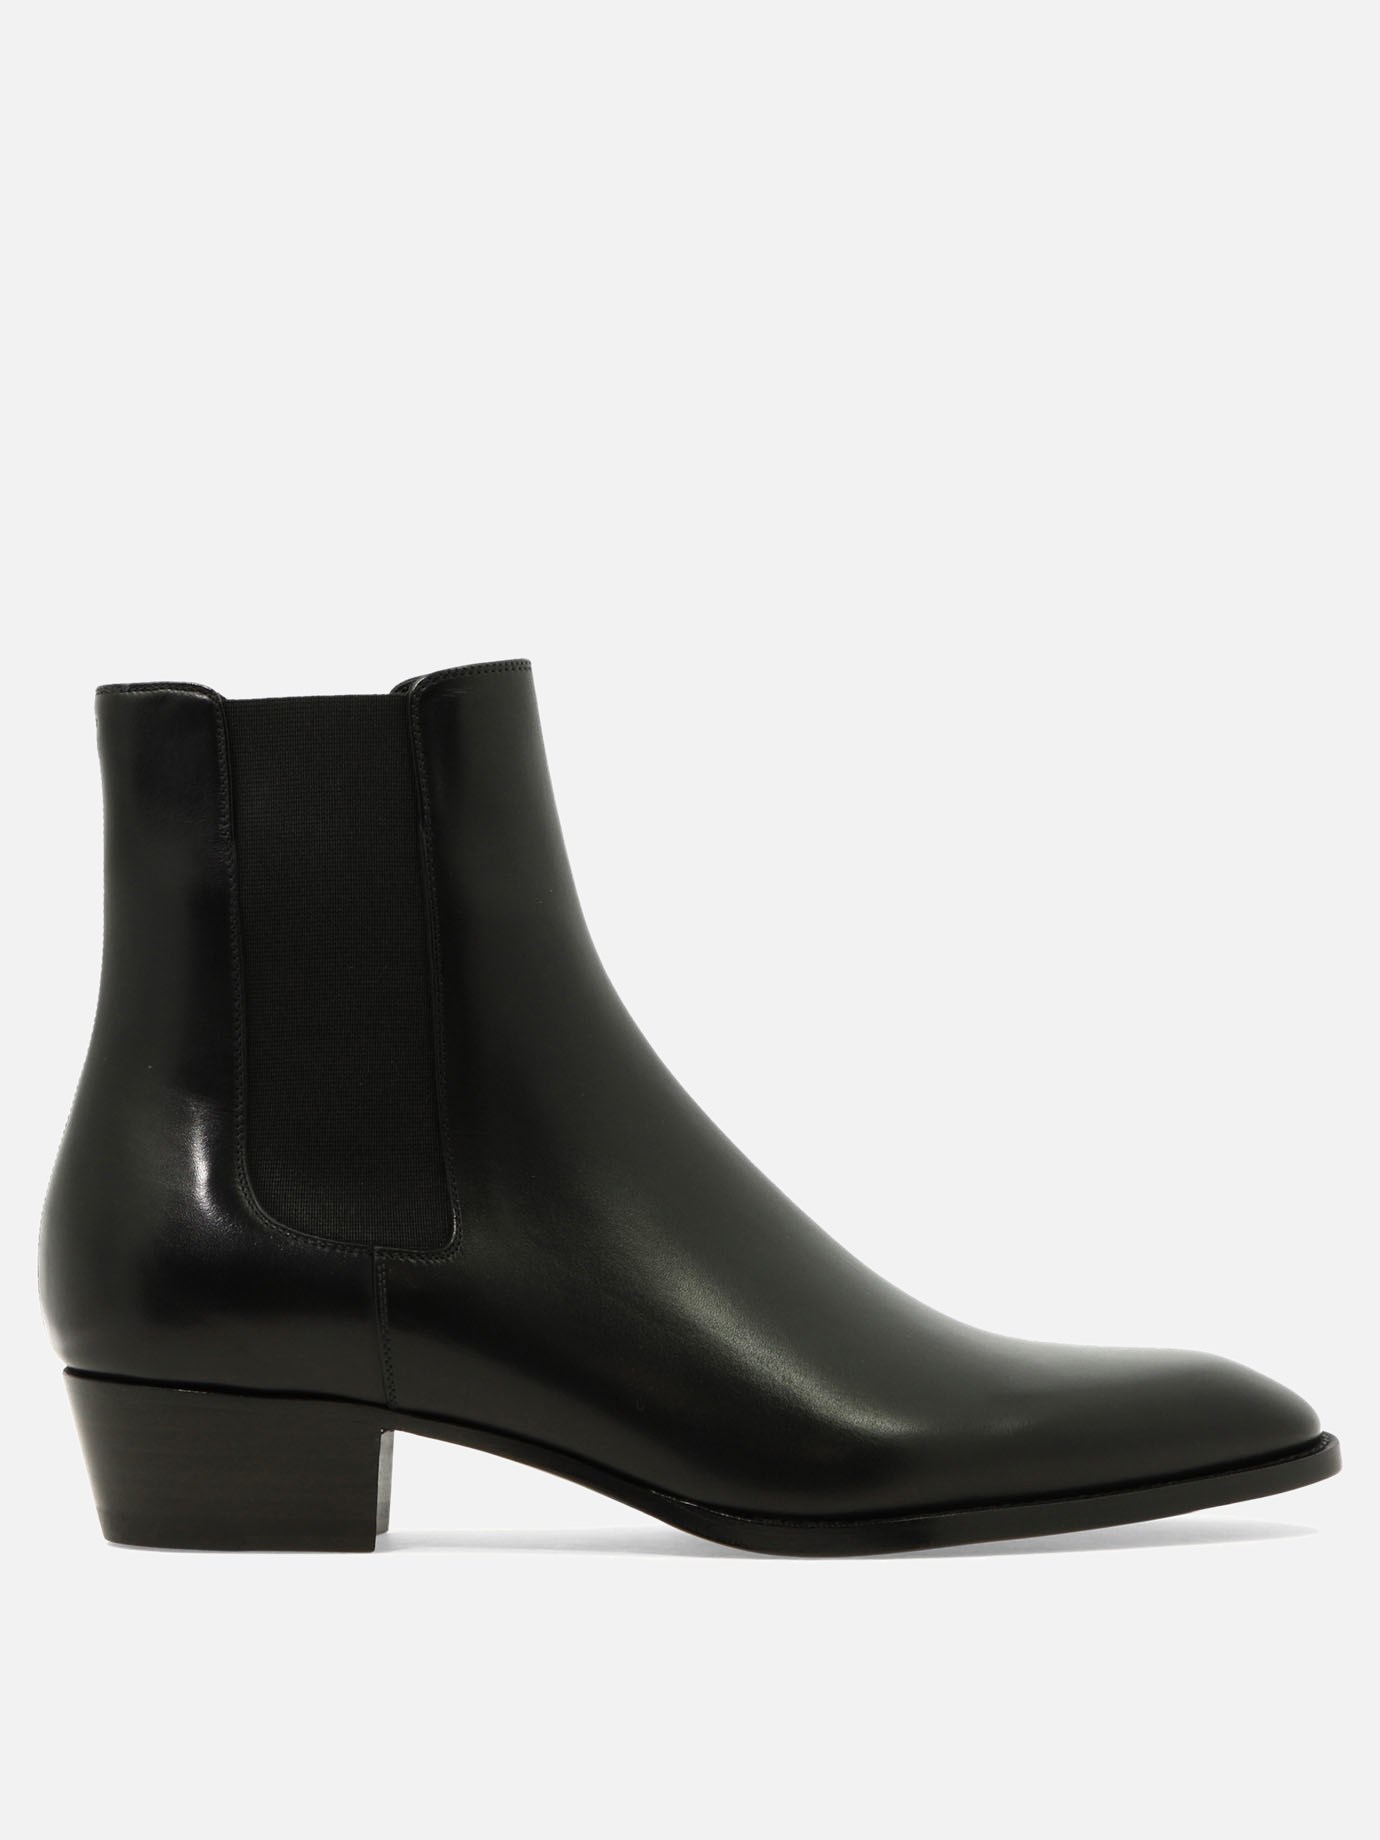  Chelsea  ankle boots by Celine